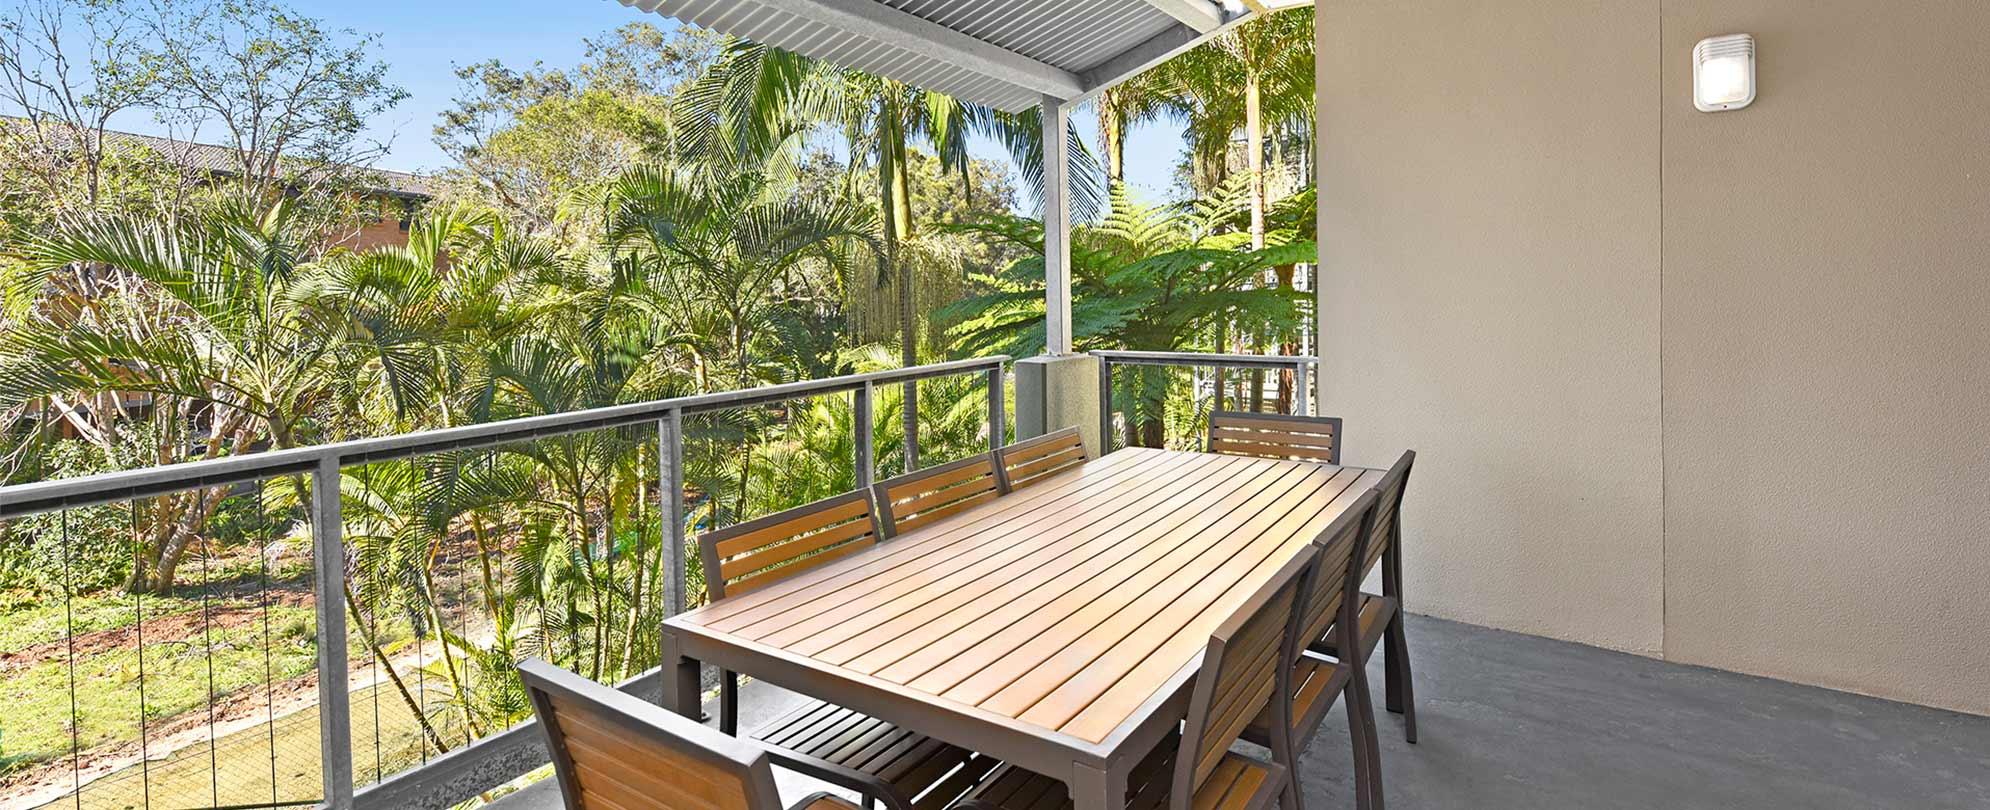 The balcony of a Club Wyndham Flynns Beach standard suite with a table and 8 chairs, with views of palm trees.